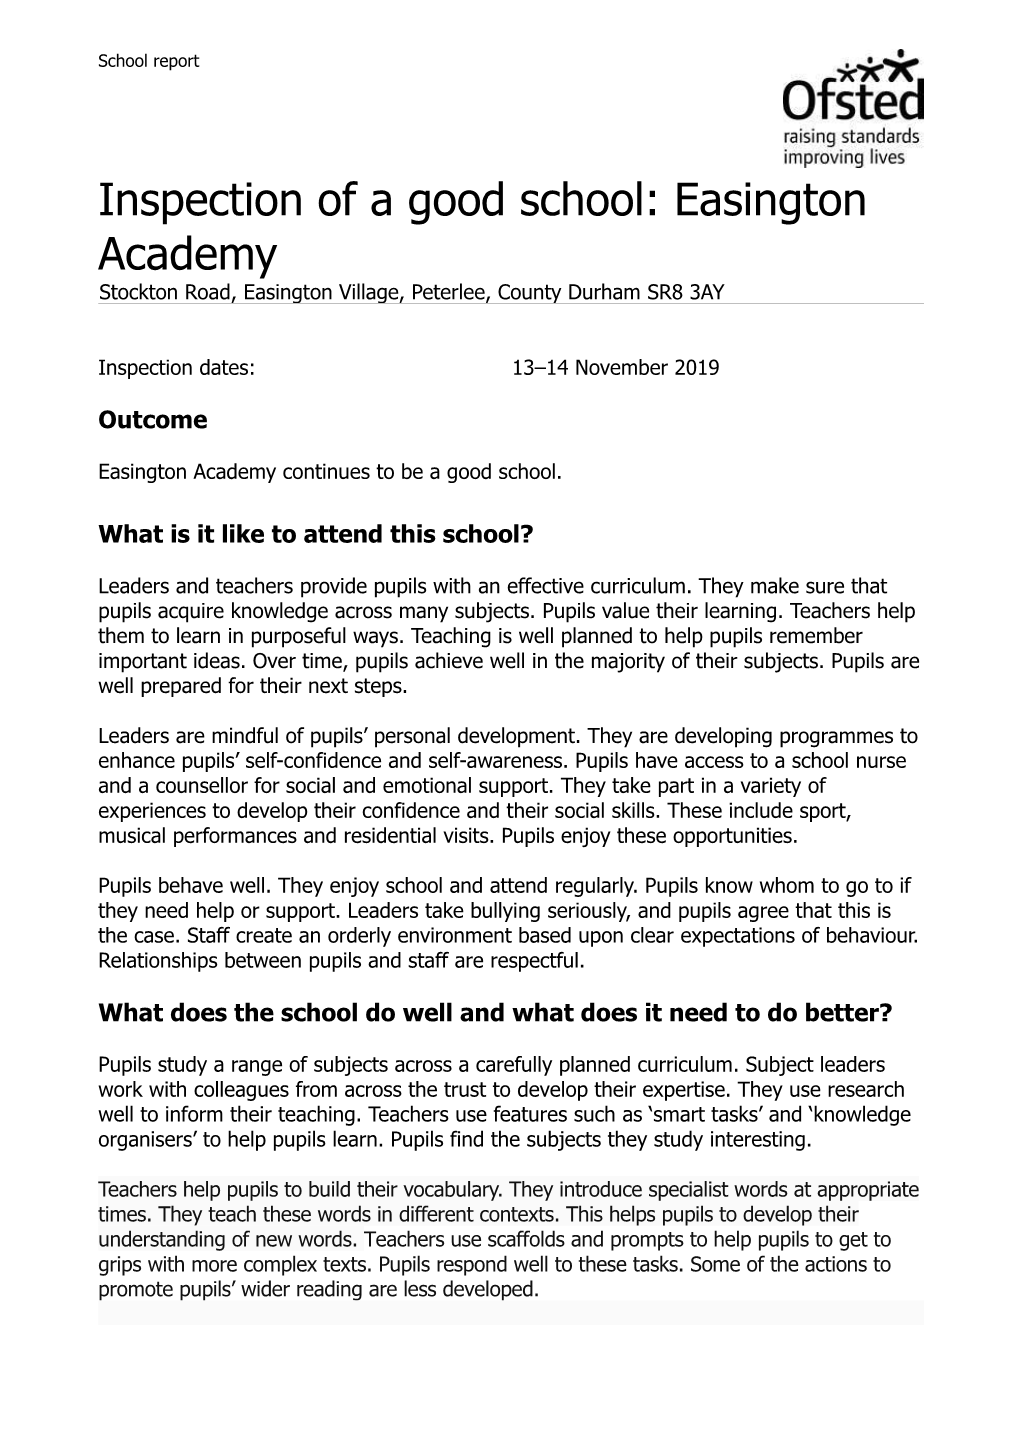 Ofsted Short Inspection Report